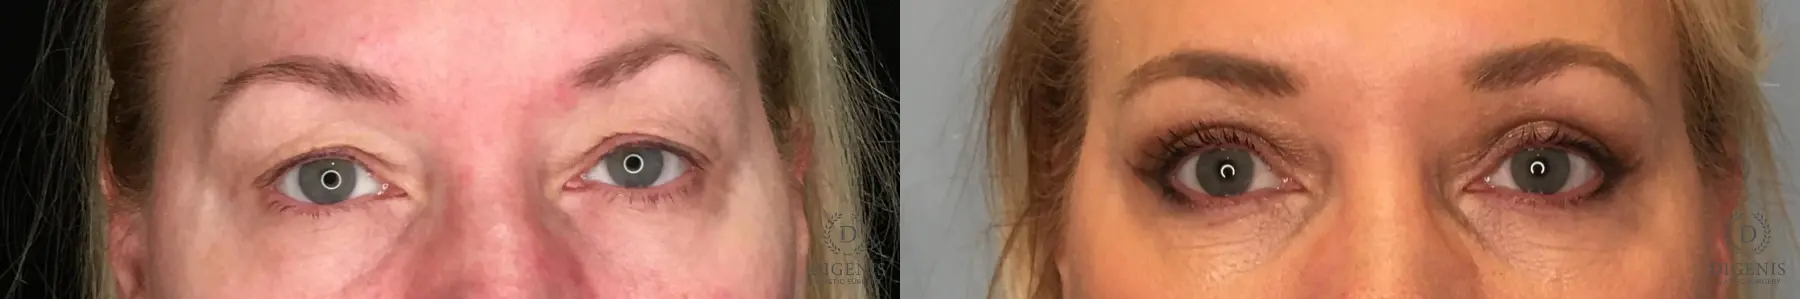 Blepharoplasty: Patient 2 - Before and After 1